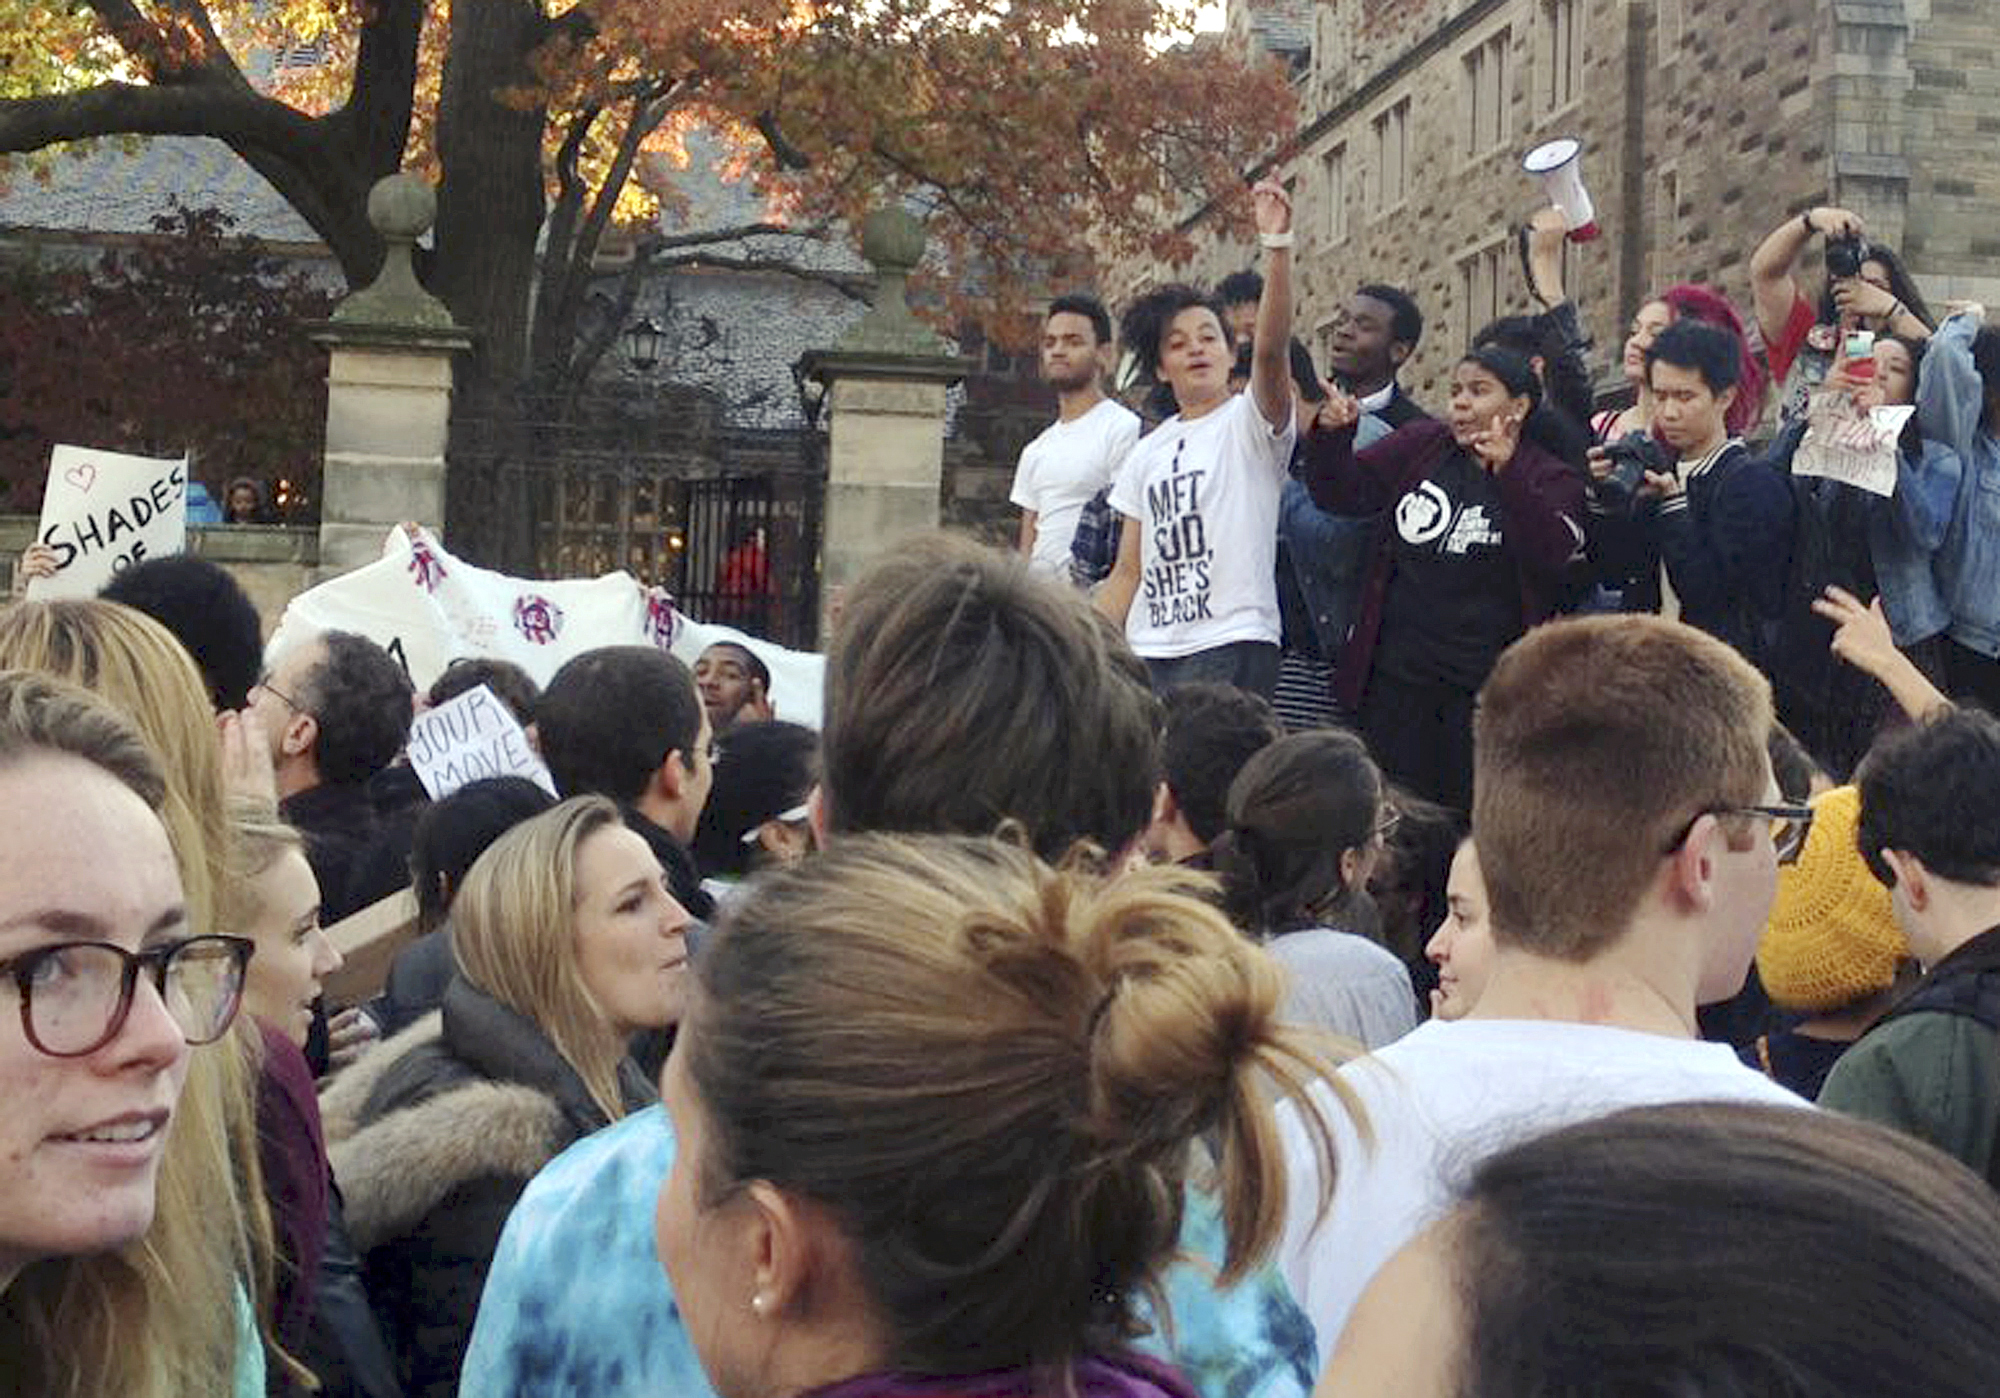 PHOTO:Yale University students and supporters participate in a march across campus to demonstrate against what they see as racial insensitivity at the Ivy League school, Nov. 9, 2015, in New Haven, Conn.  